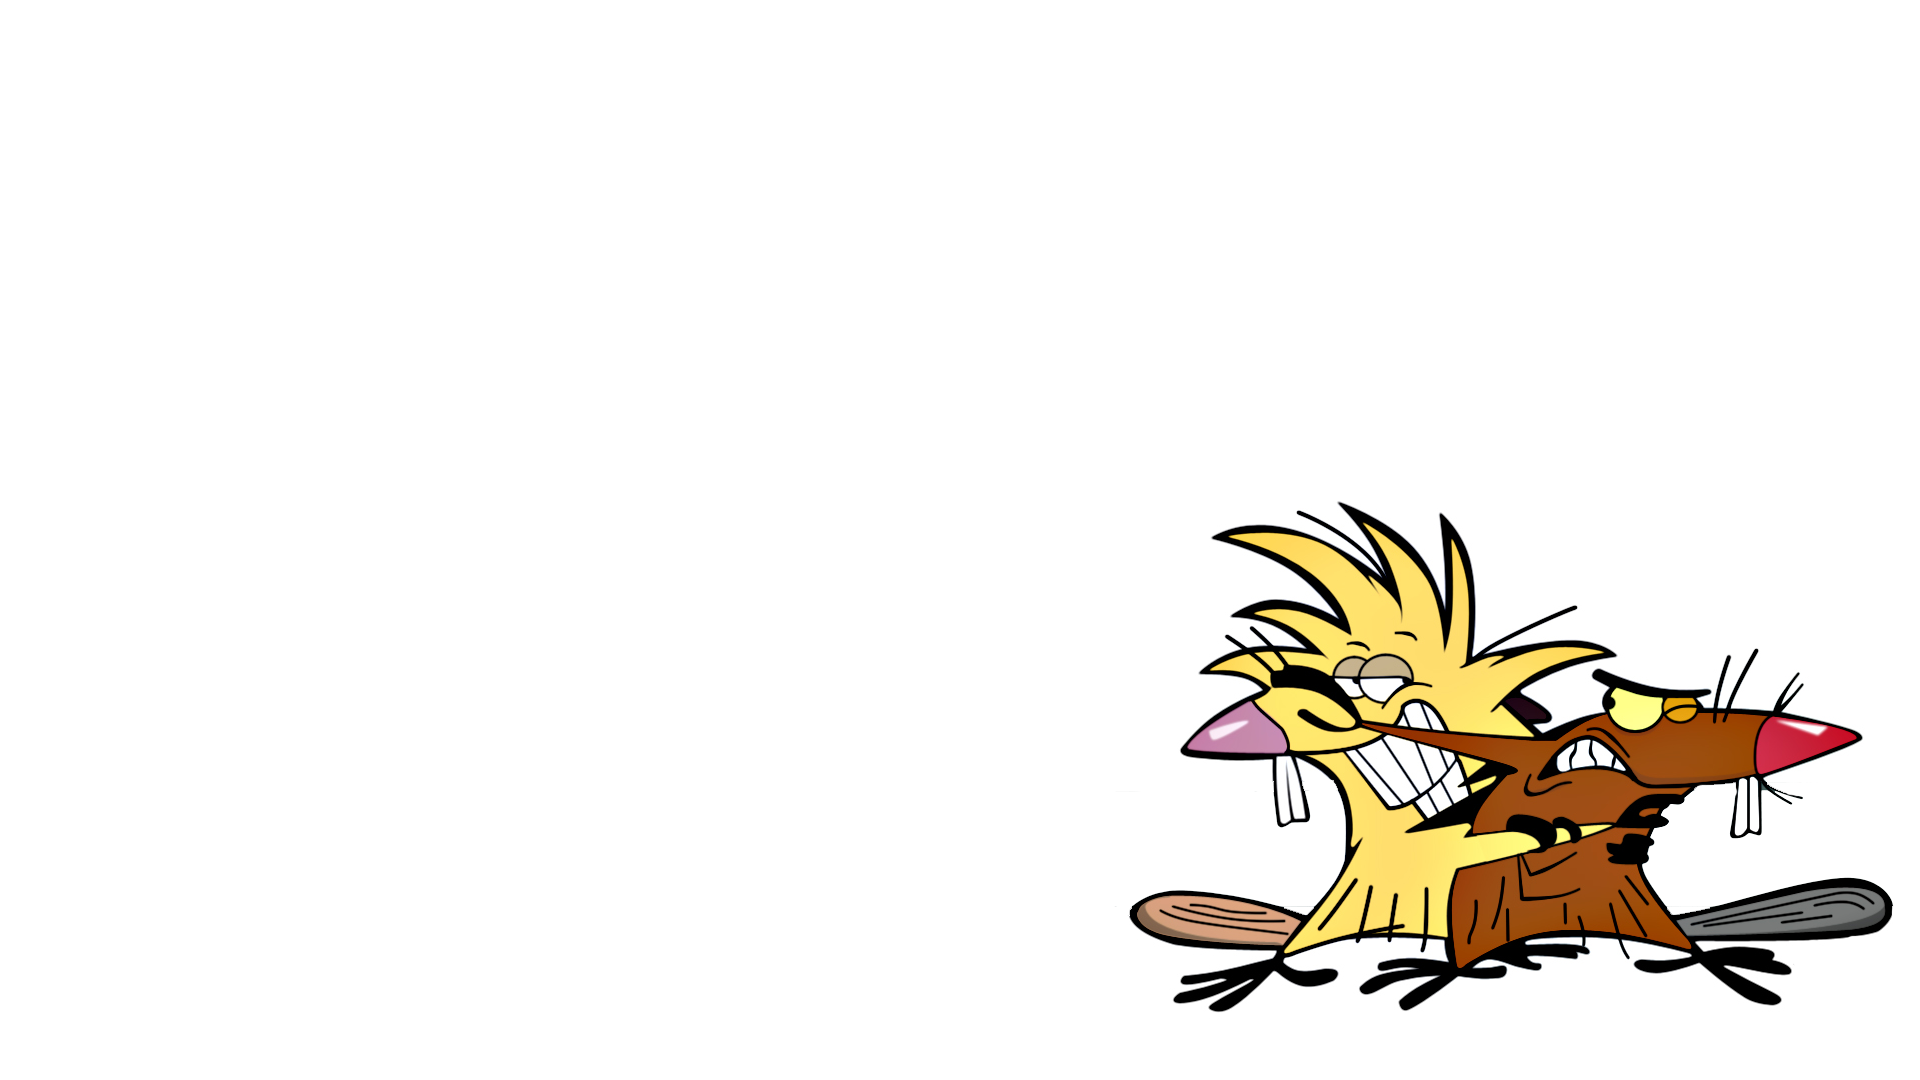 The Angry Beavers Backgrounds, Compatible - PC, Mobile, Gadgets| 1920x1080 px